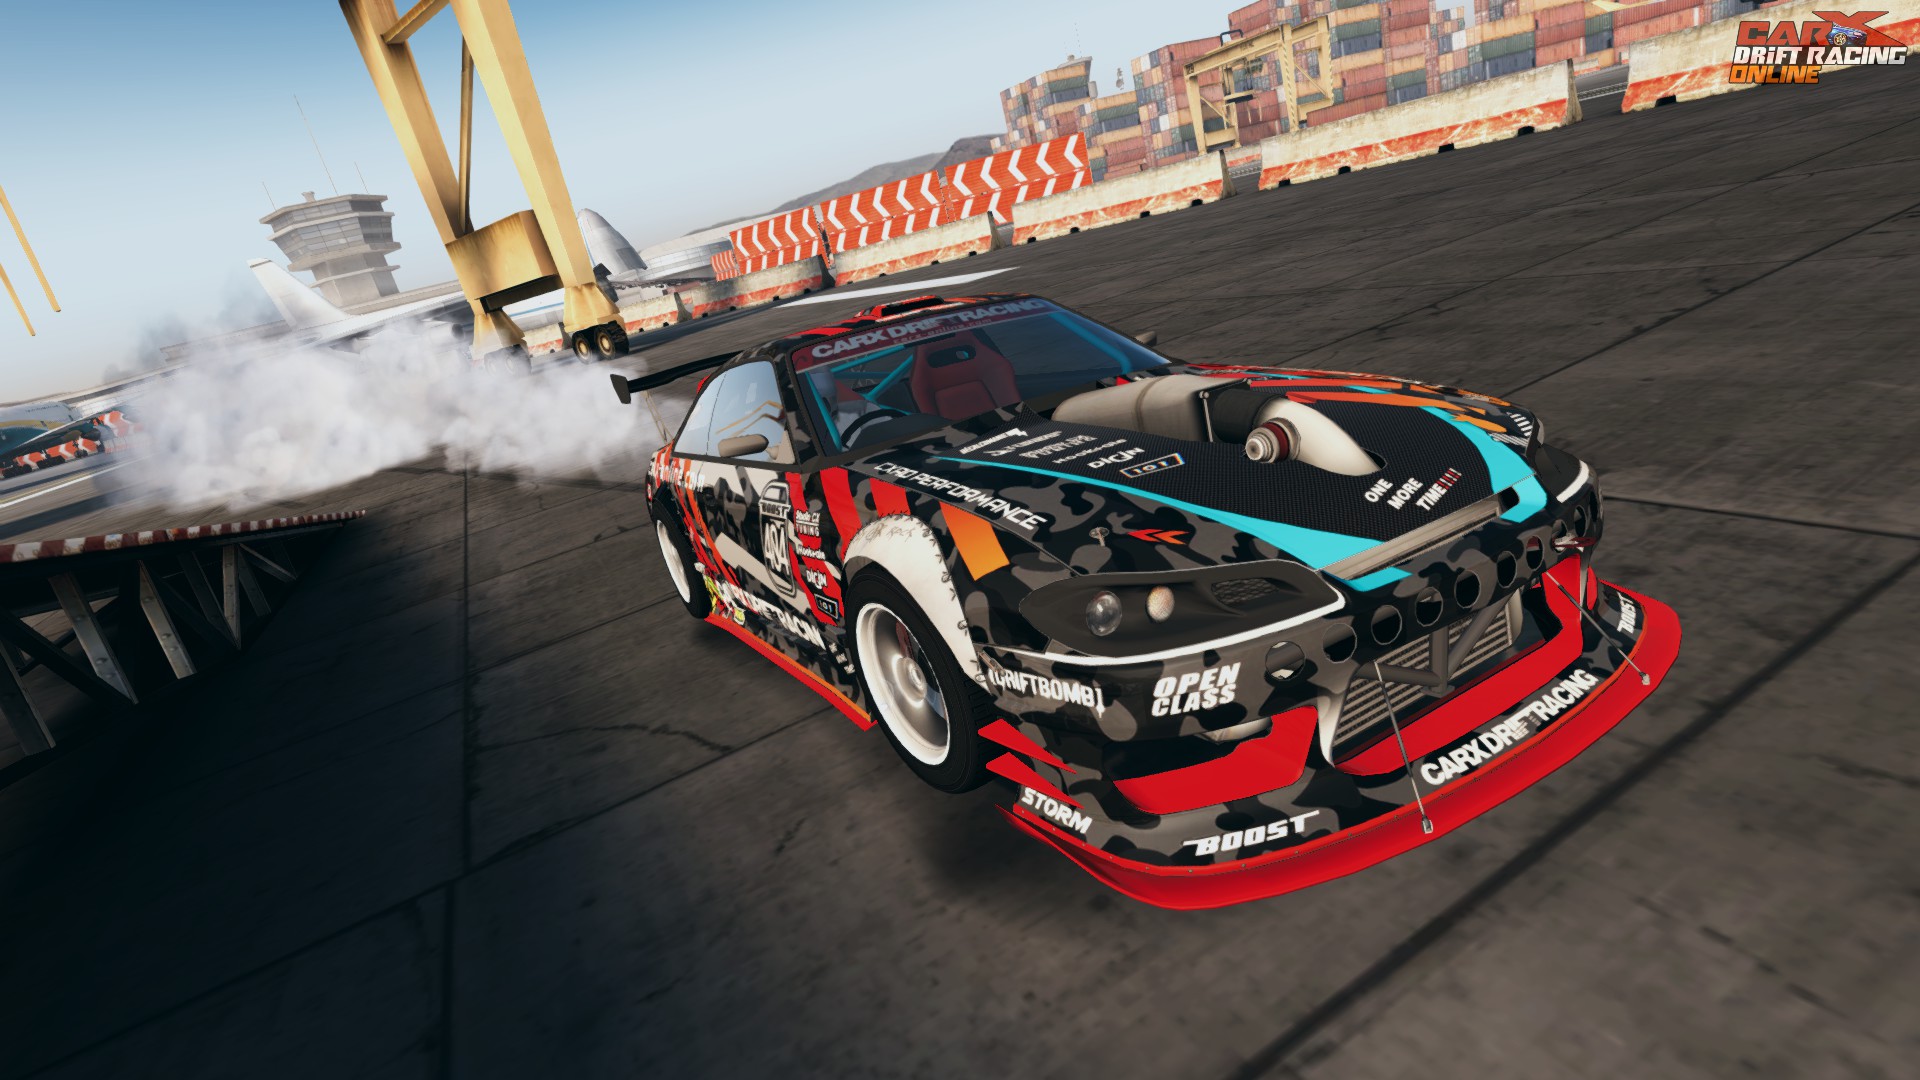 CarX Drift Racing Online - New Style 2 on Steam